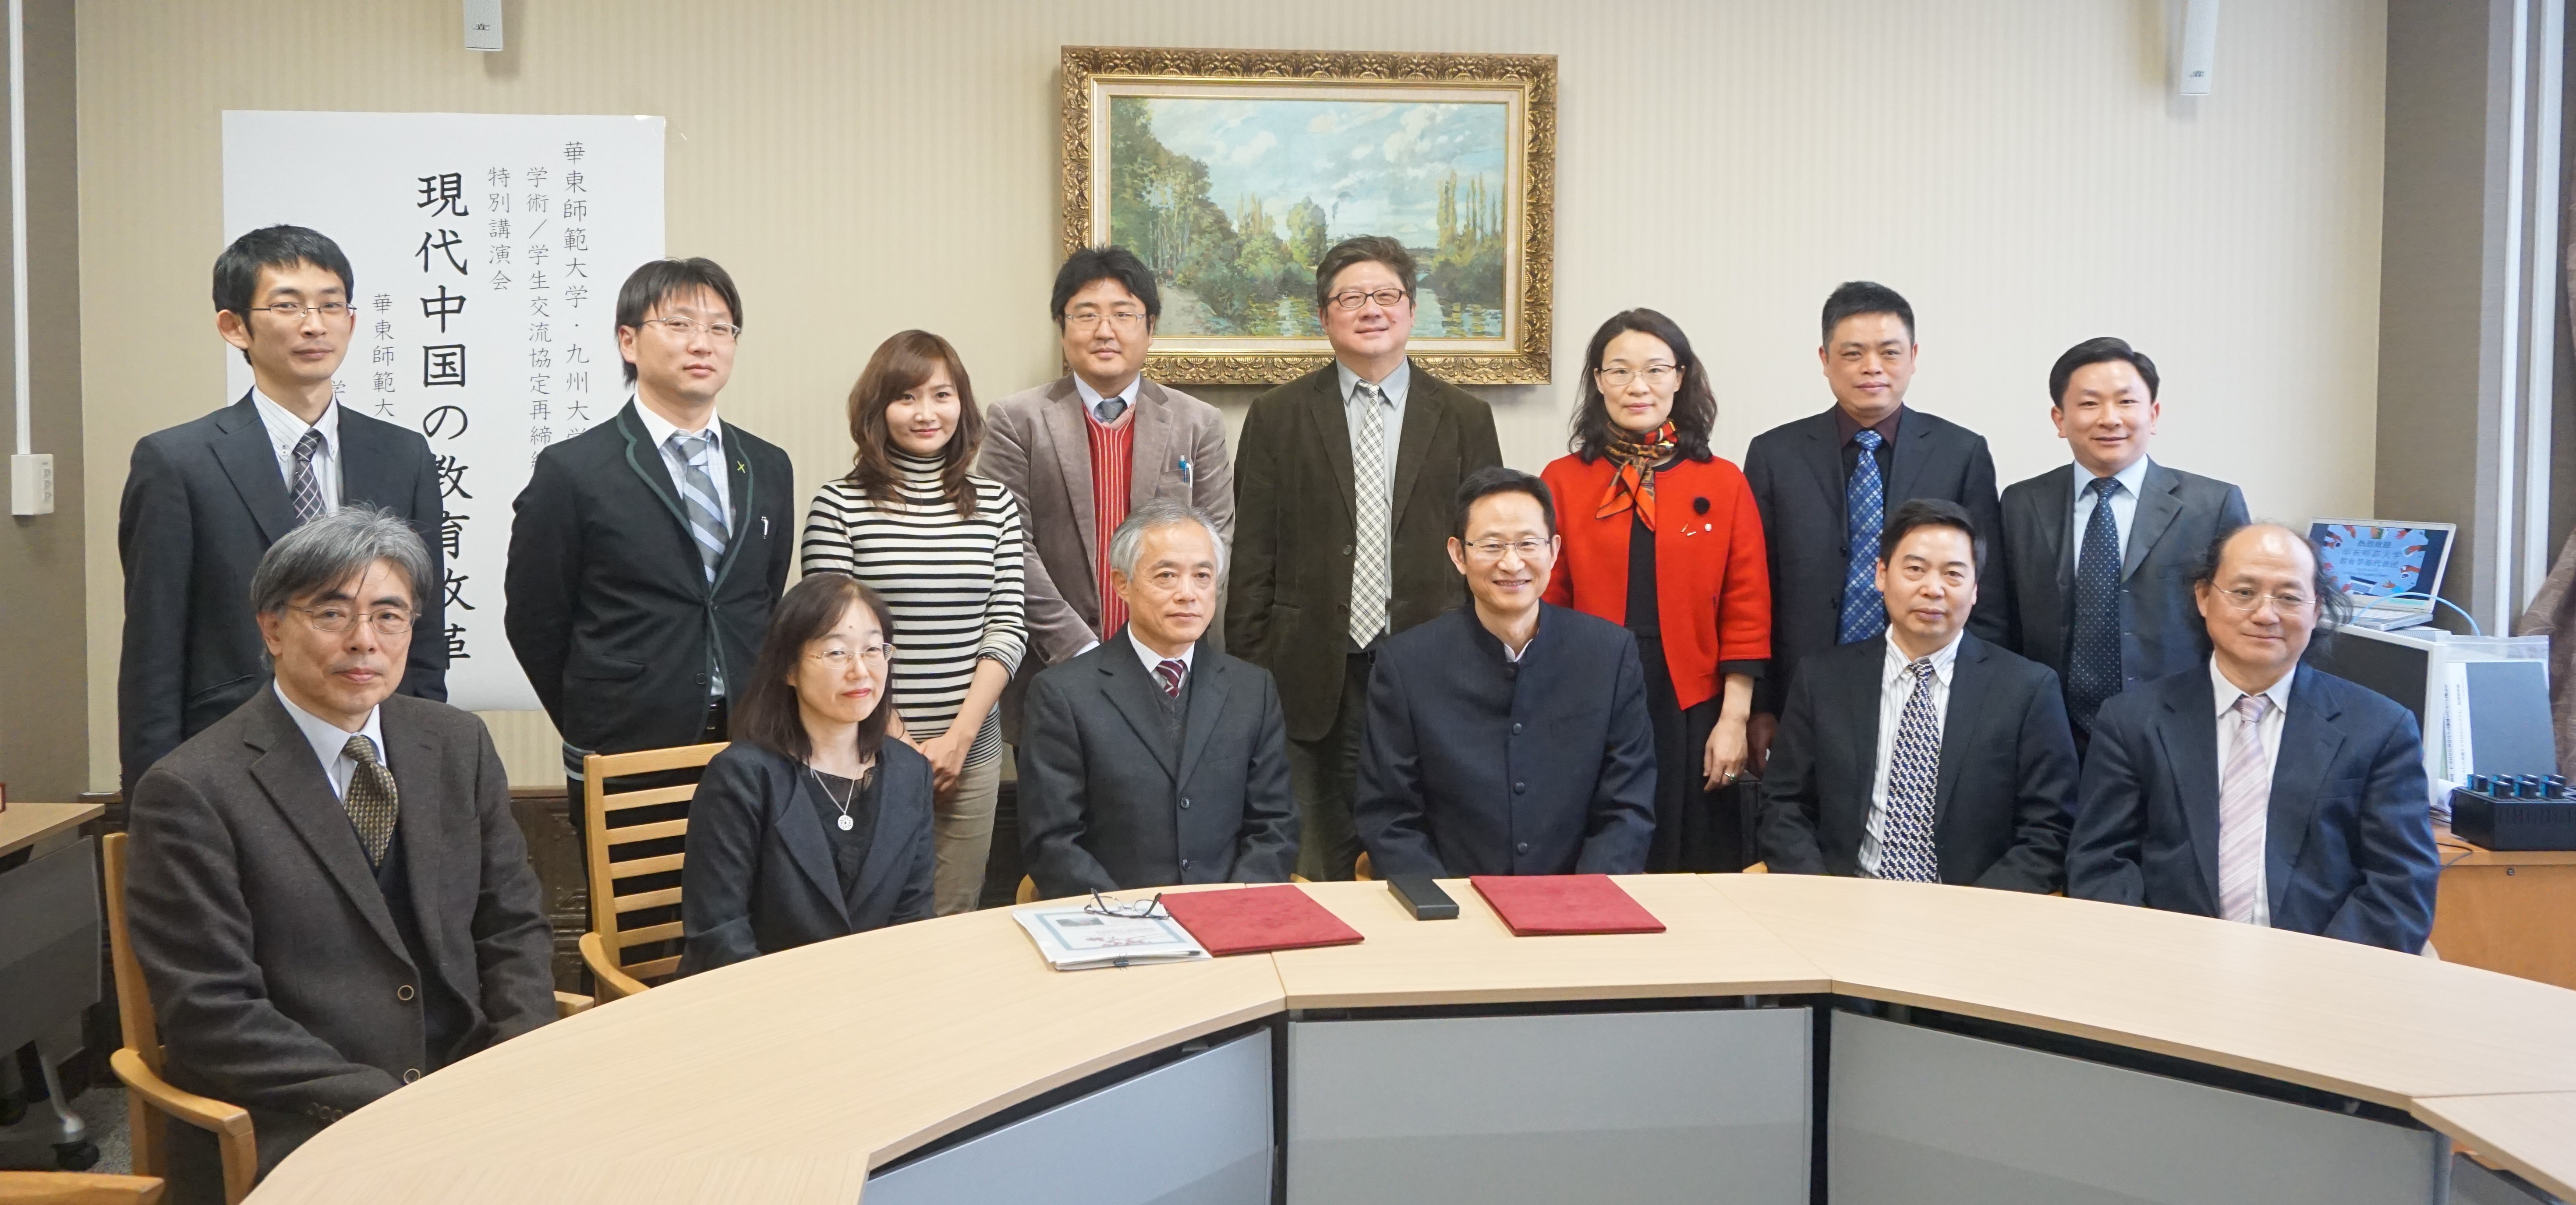 Dean of the Faculty of Education Signs a Cooperation Agreement and Gives an Academic Report in Kyushu University